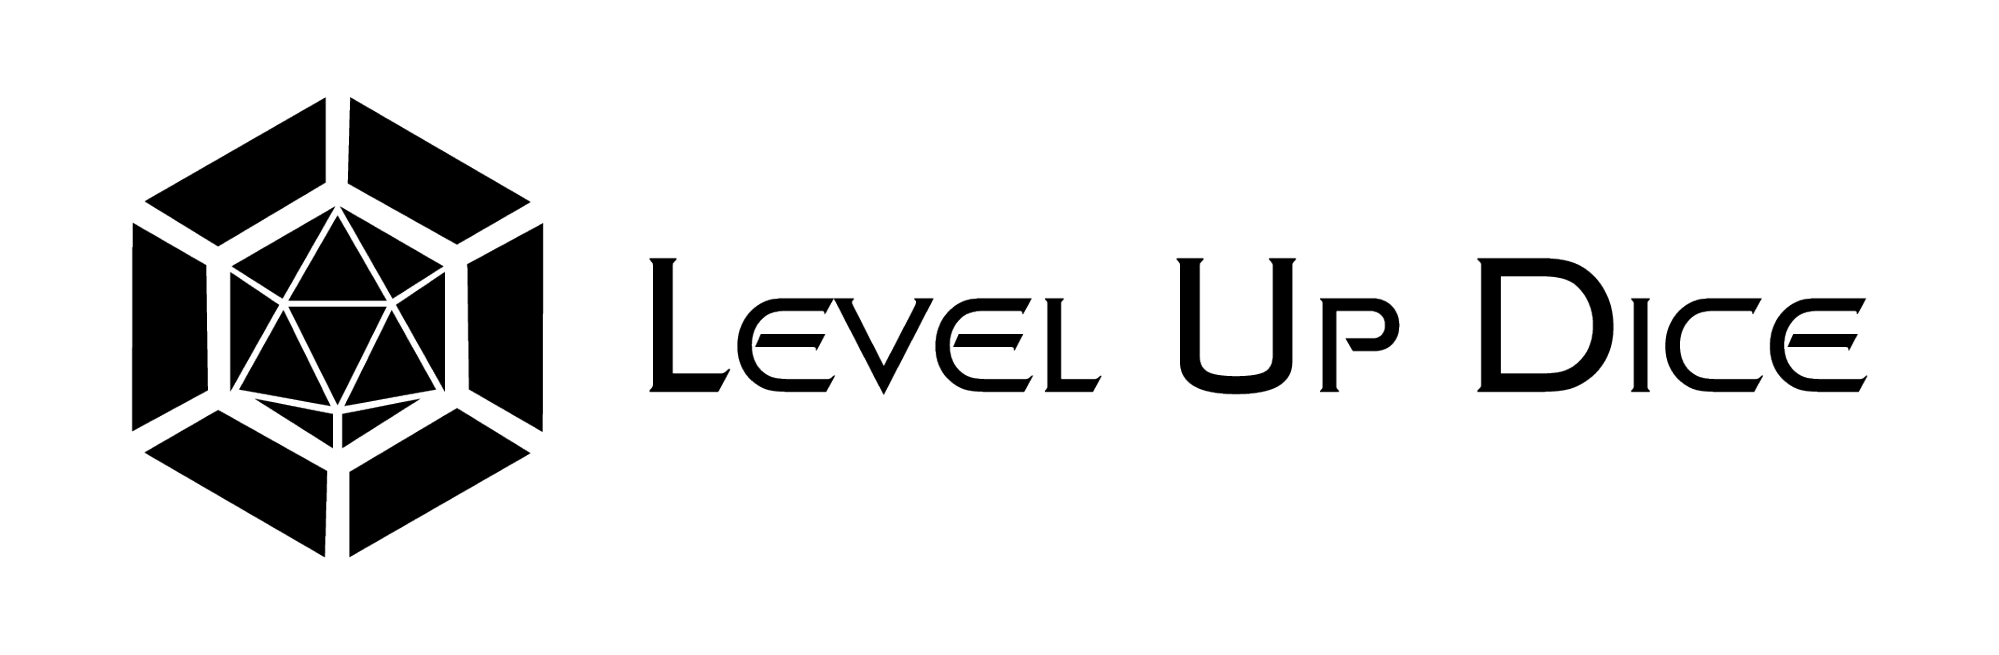 Level up dice banner with black and white D20 logo